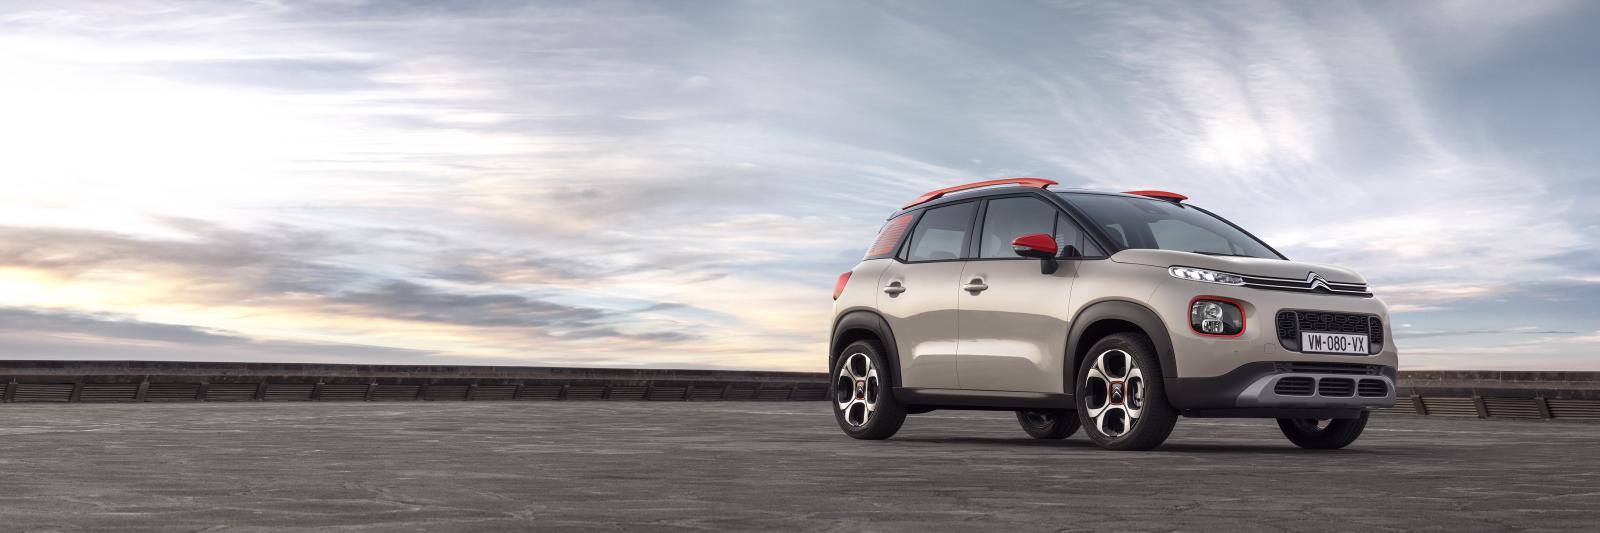 C3 Aircross Compact SUV- 3/4 front